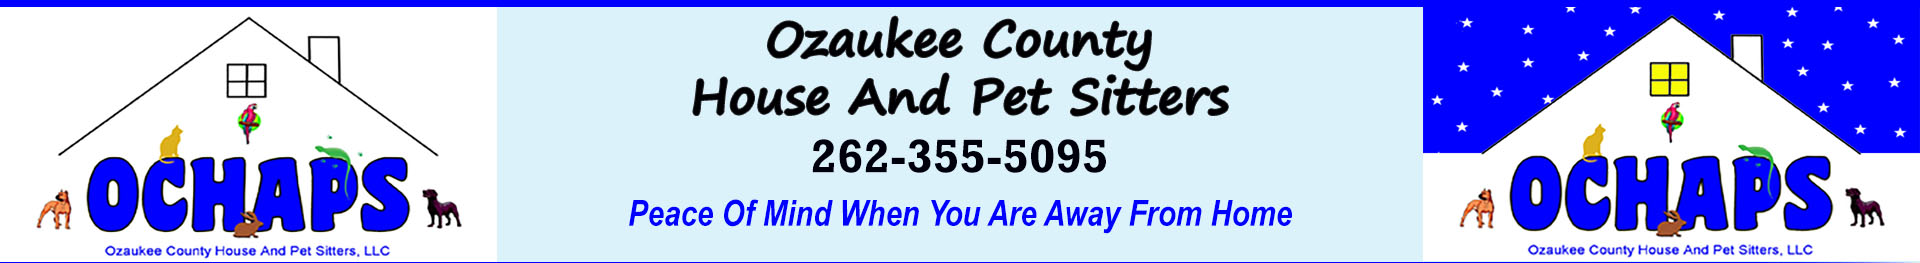 Ozaukee County House and Pet Sitters